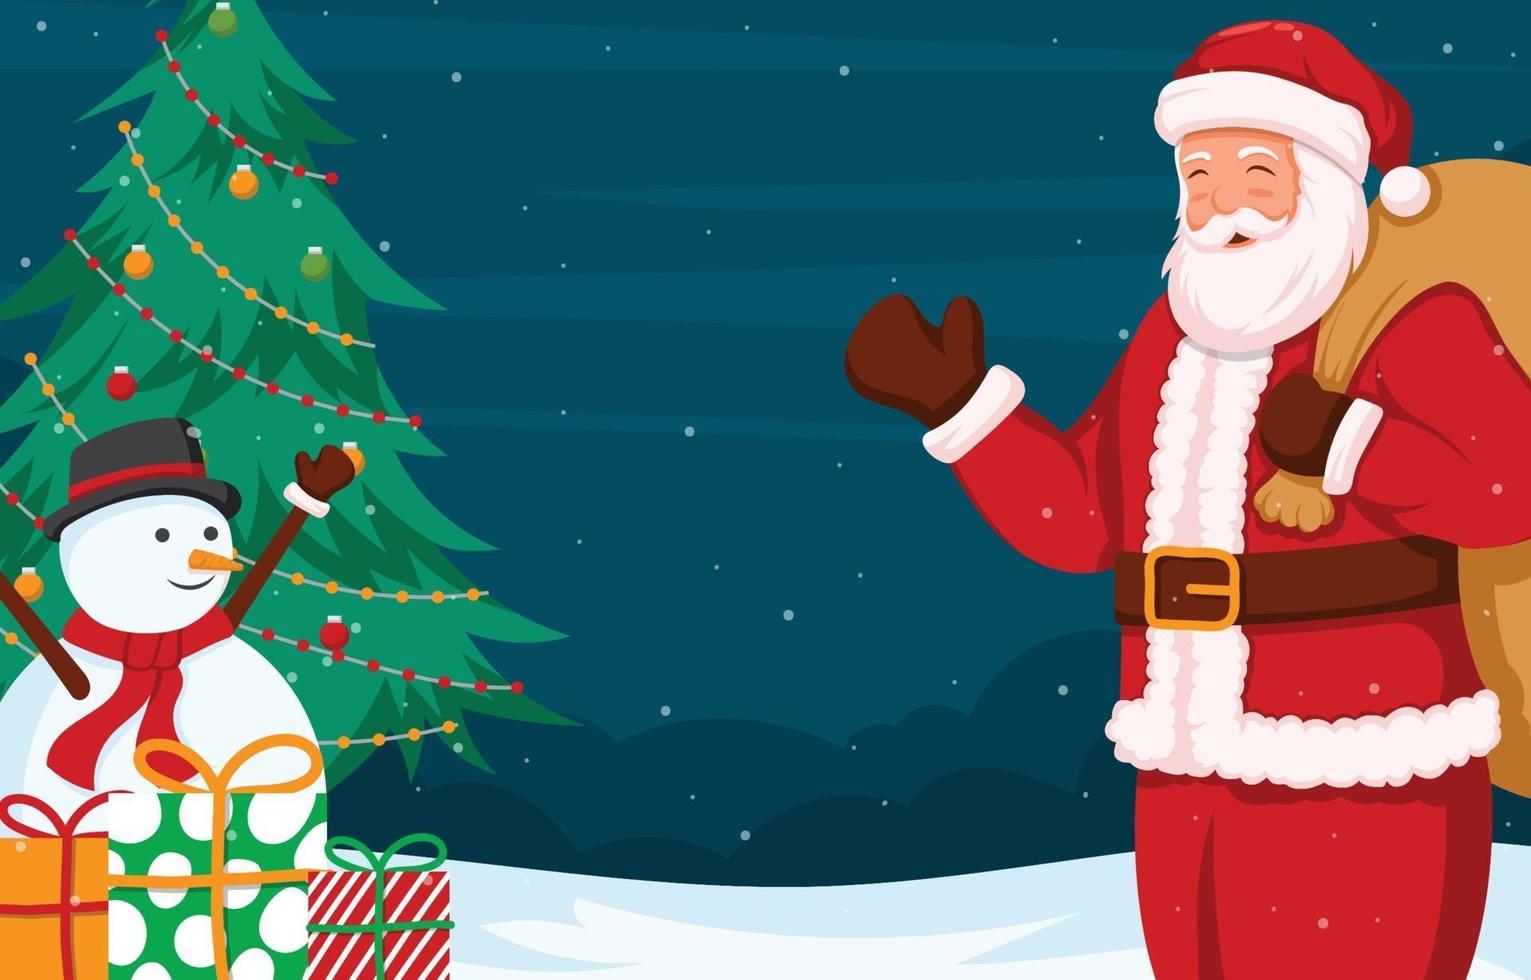 Santa Claus With Christmas Tree and Snowman vector